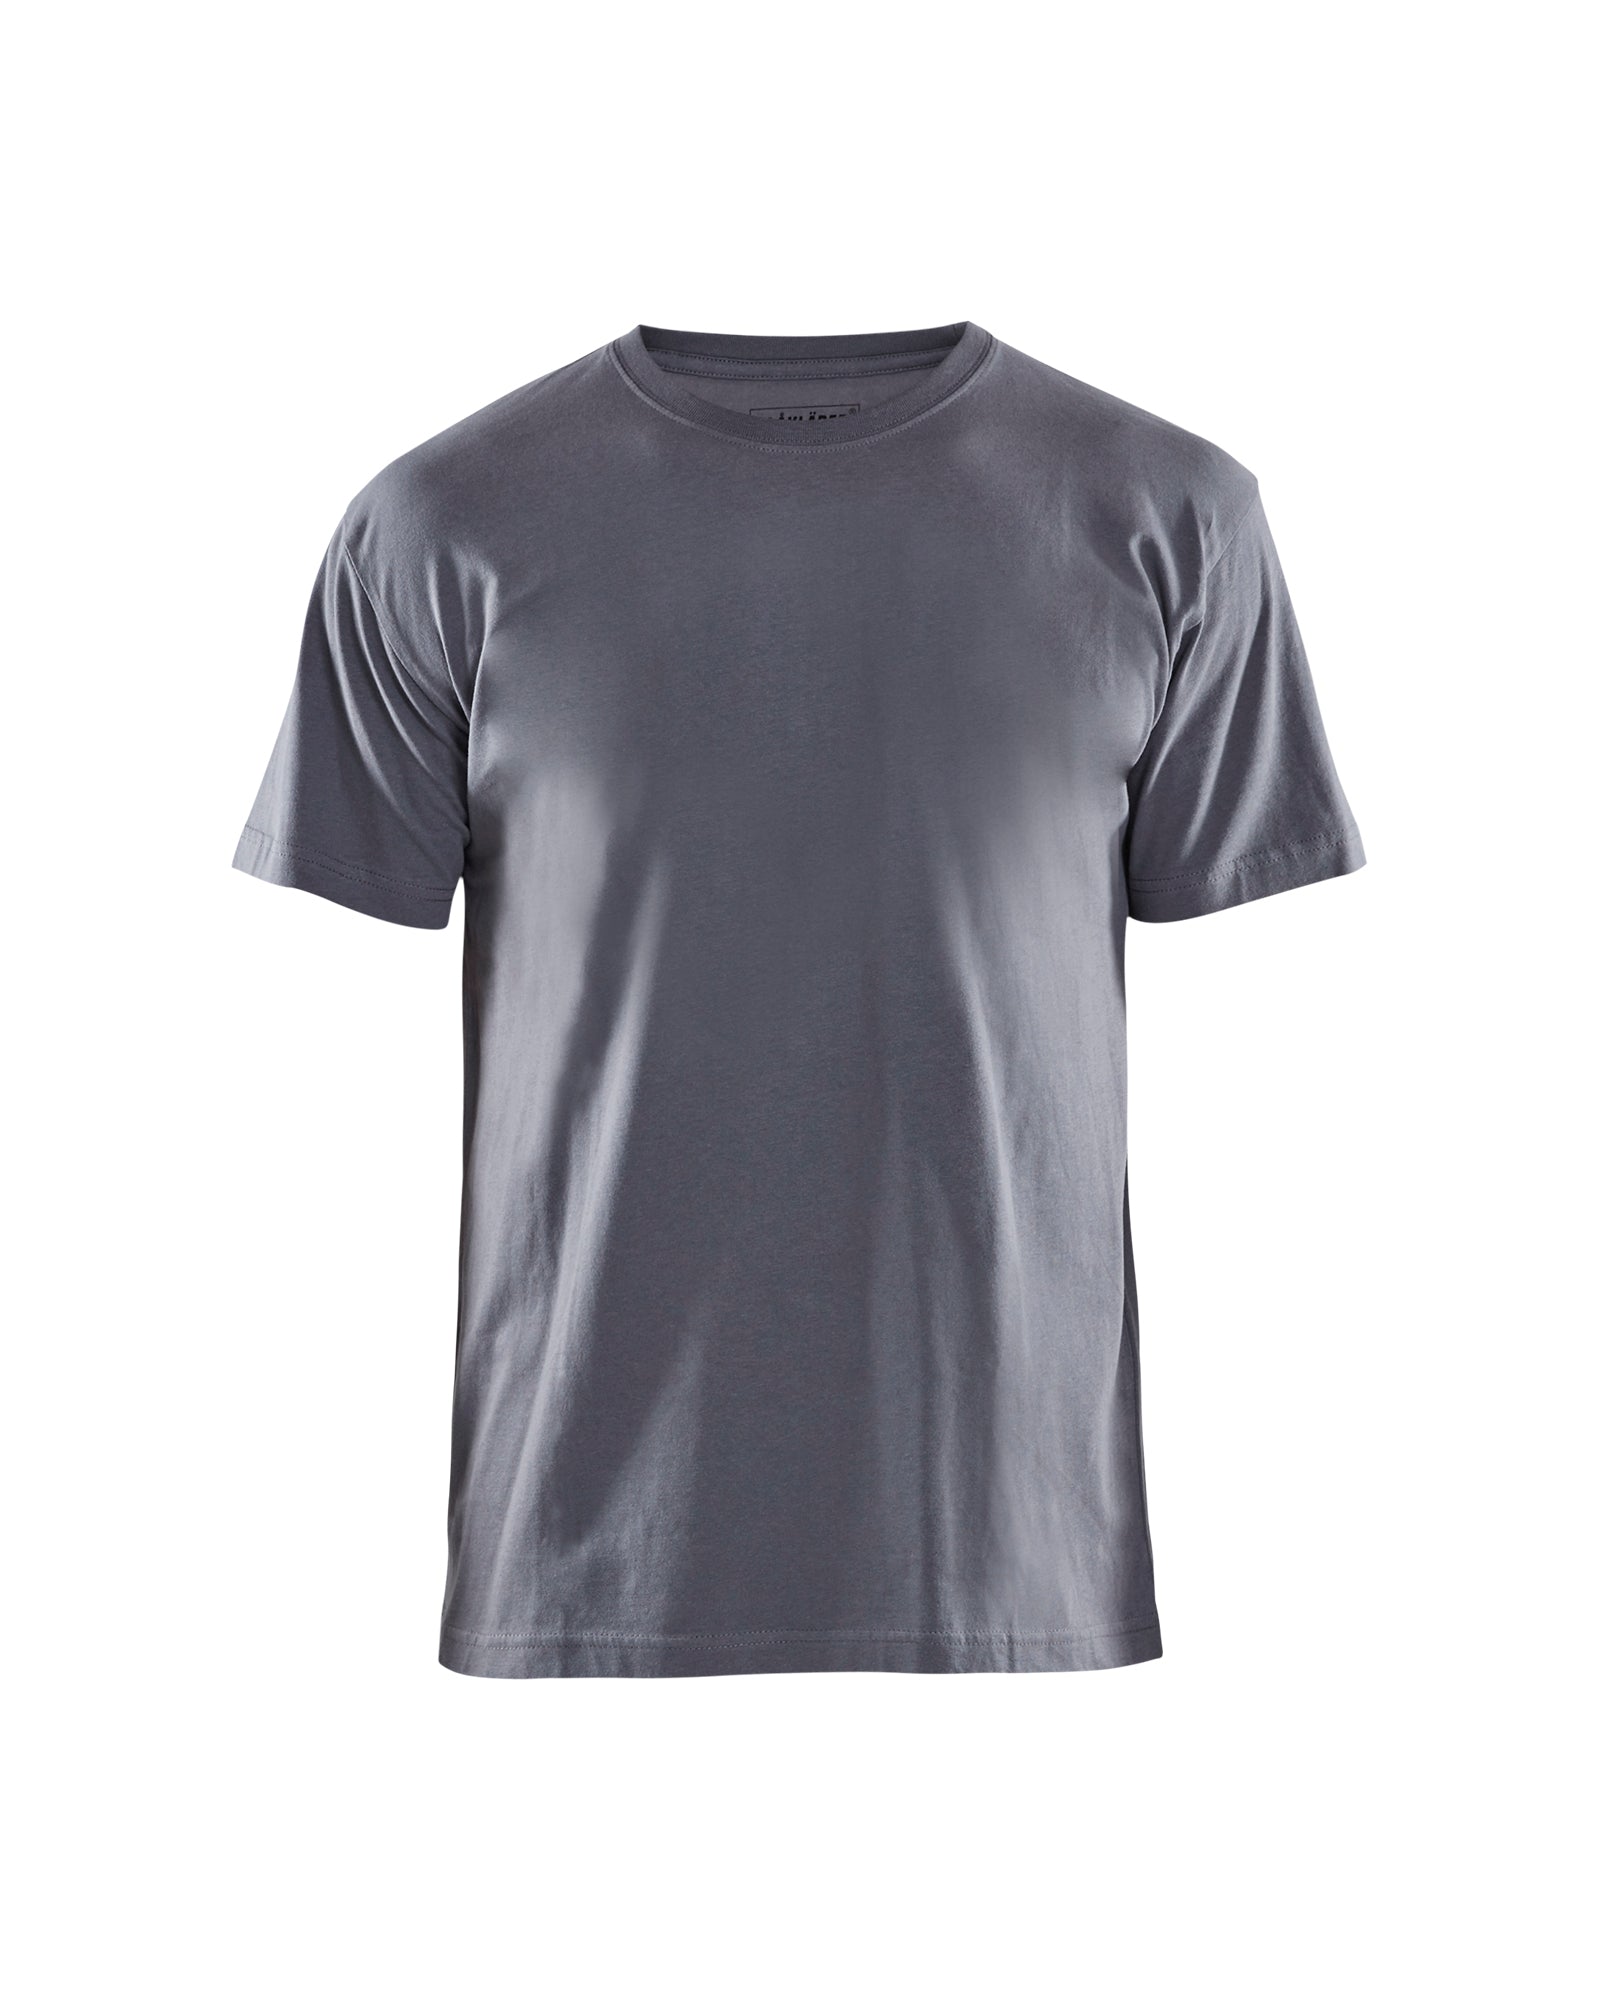 Men's Blaklader US Short Sleeves T-Shirt in Grey from the front view